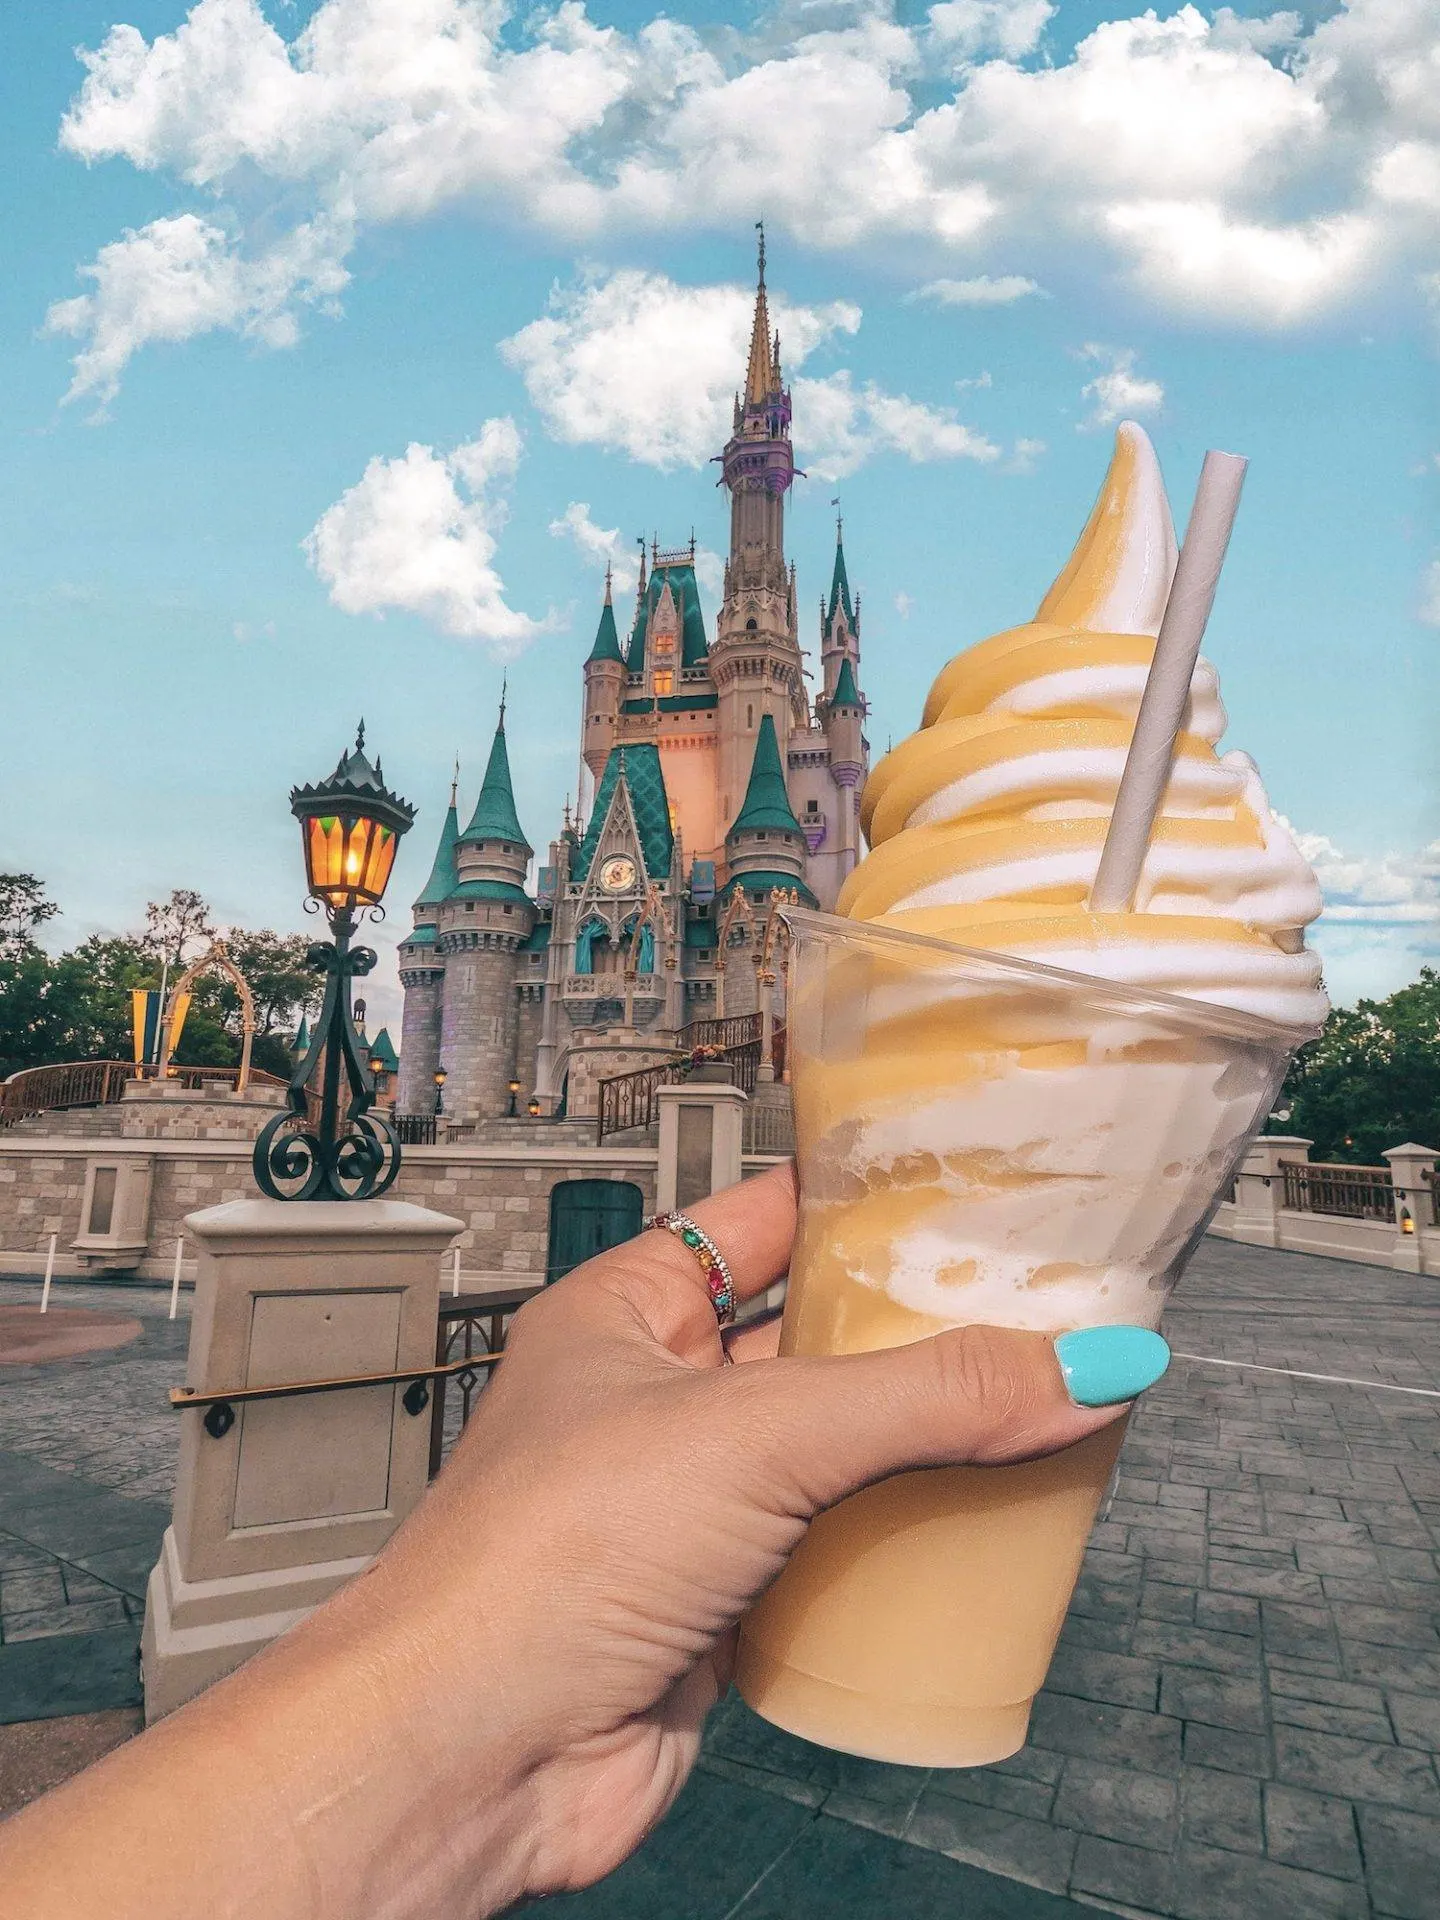 Treats and castles! Click the photo for a complete guide on how to get the perfect photo at Disney! Includes a list of all the top Disney World photo spots. via www.kirstenwendlandt.com